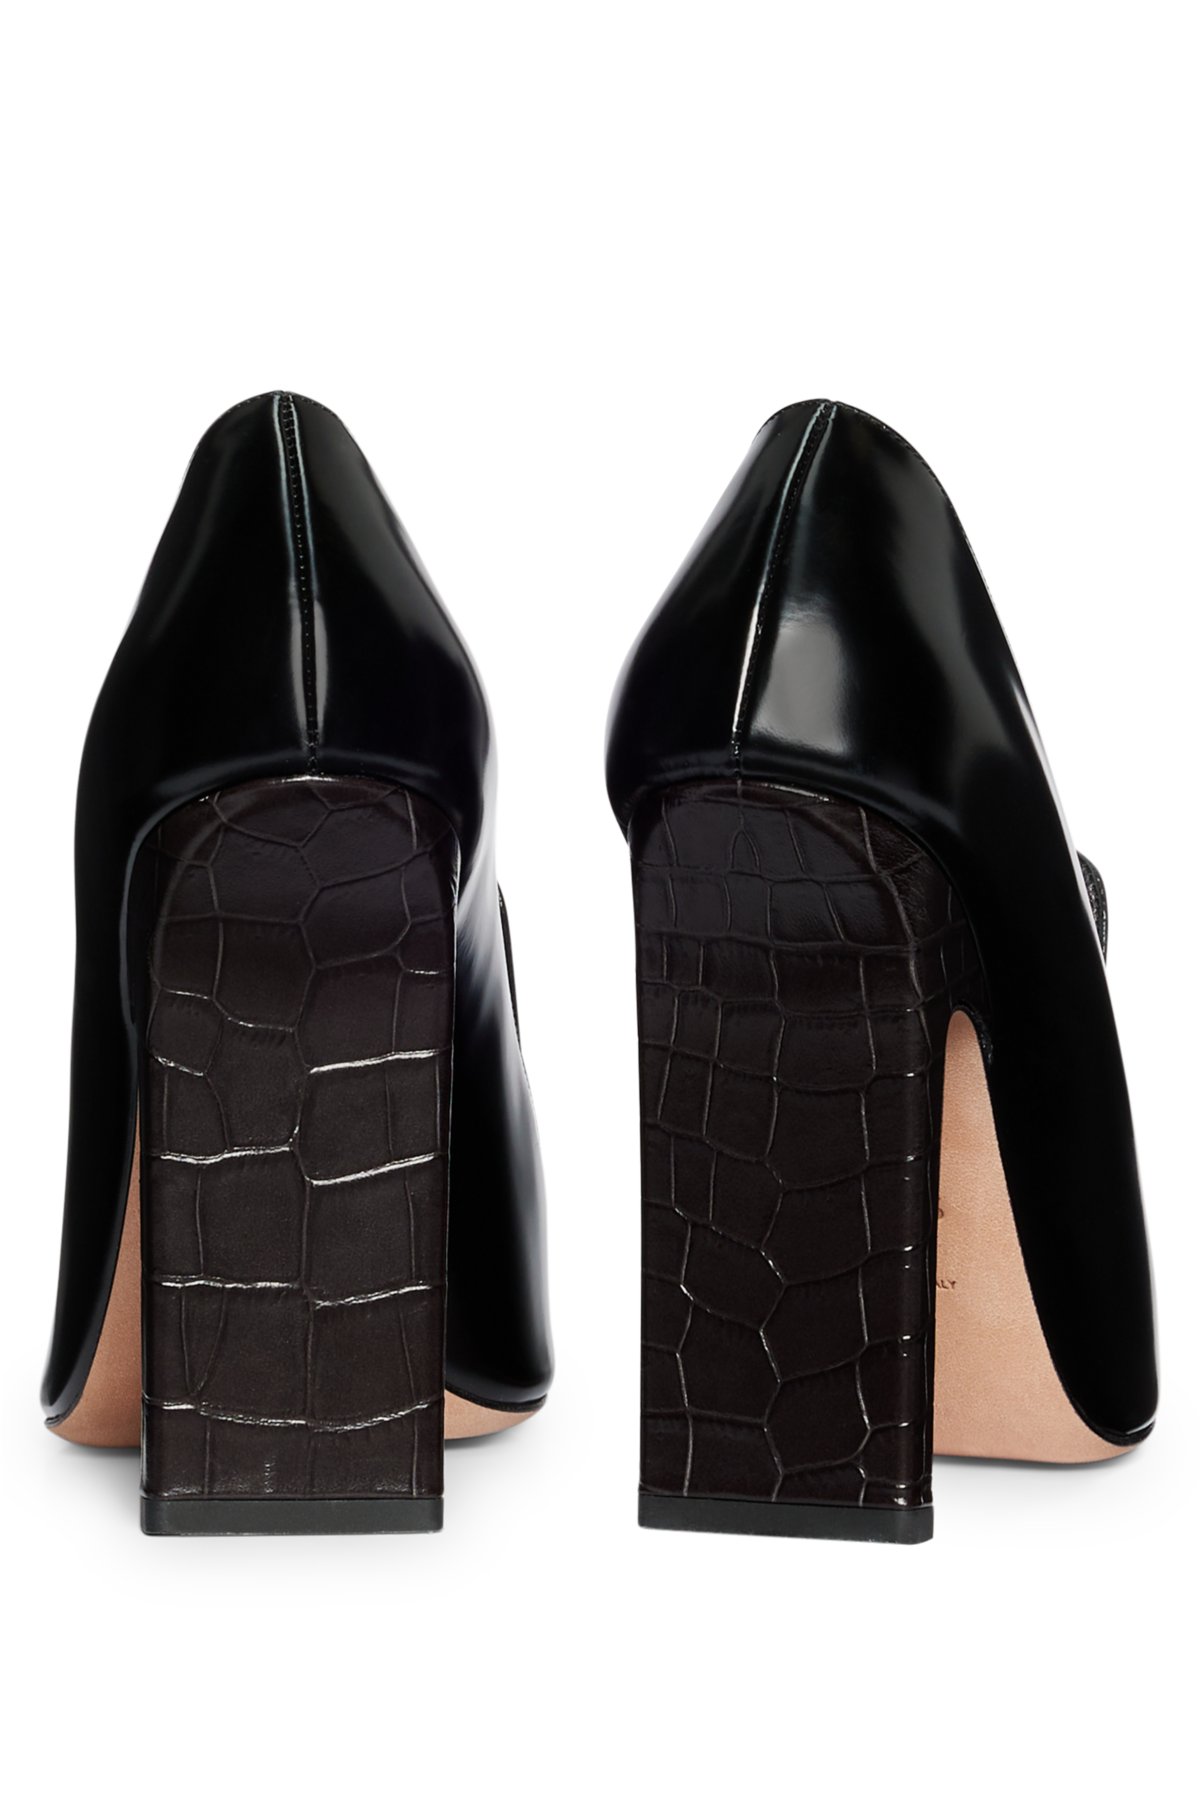 BOSS - Leather pumps with 9cm block heel